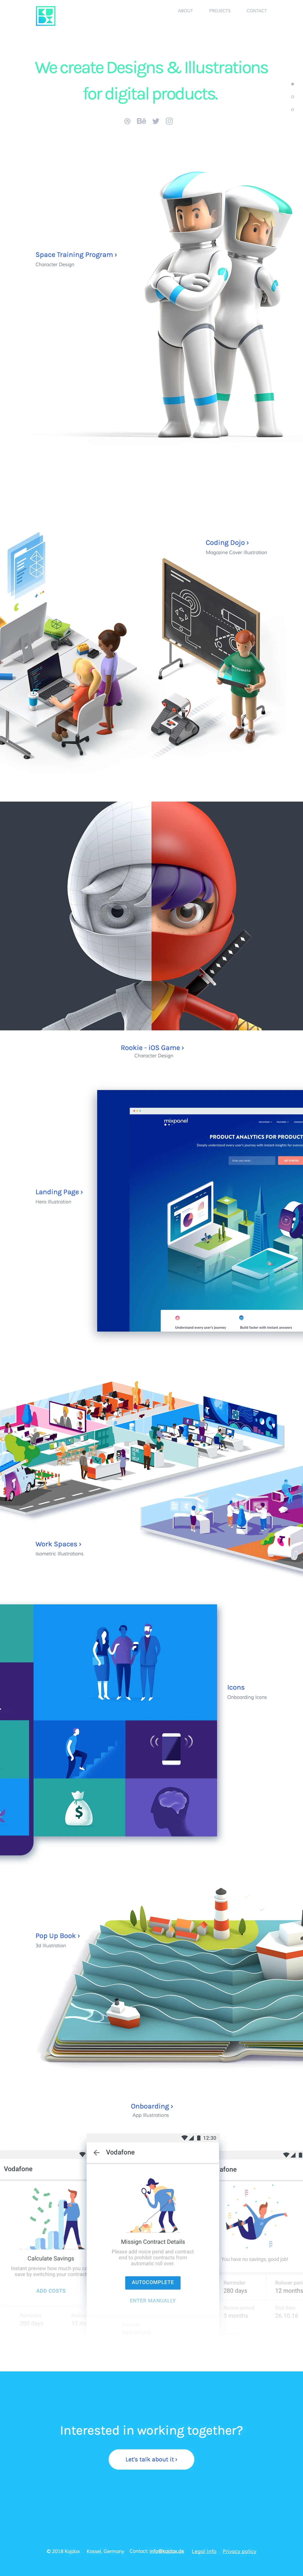 kajdax Landing Page Example: We create Designs & Illustrations for digital products